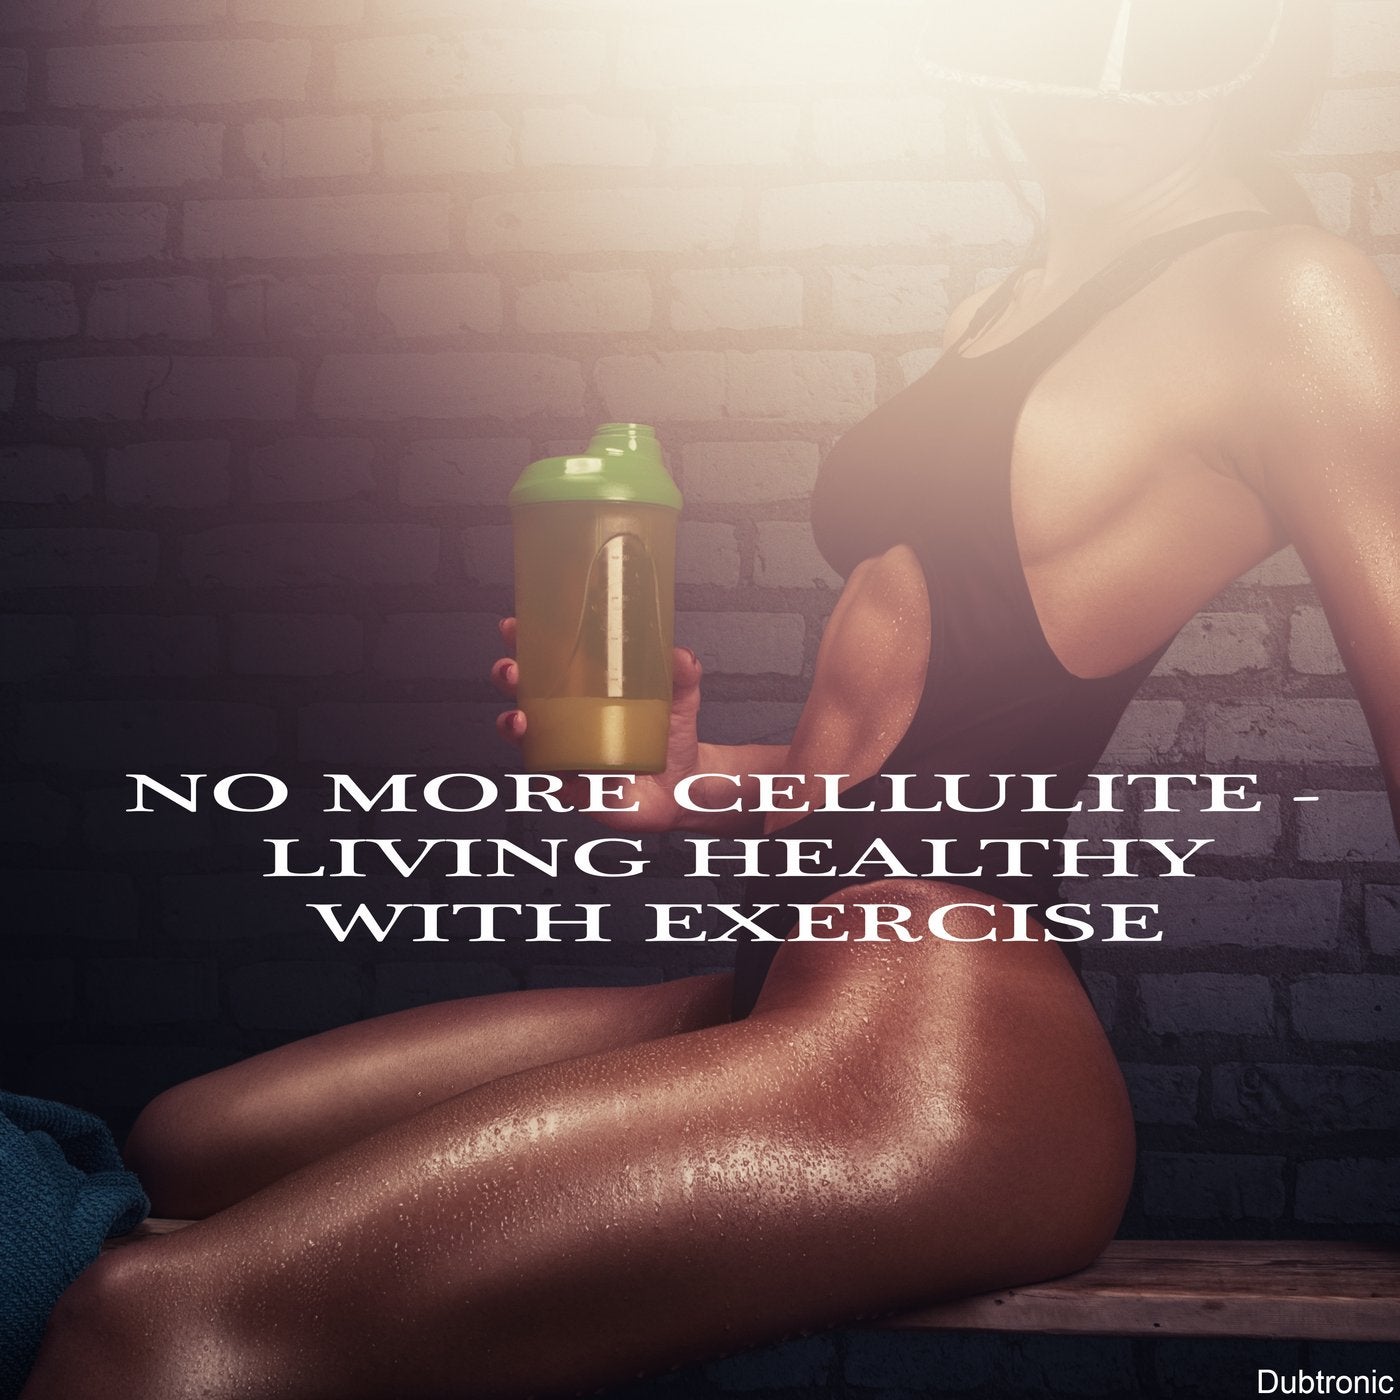 No More Cellulite - Living Healthy with Exercise